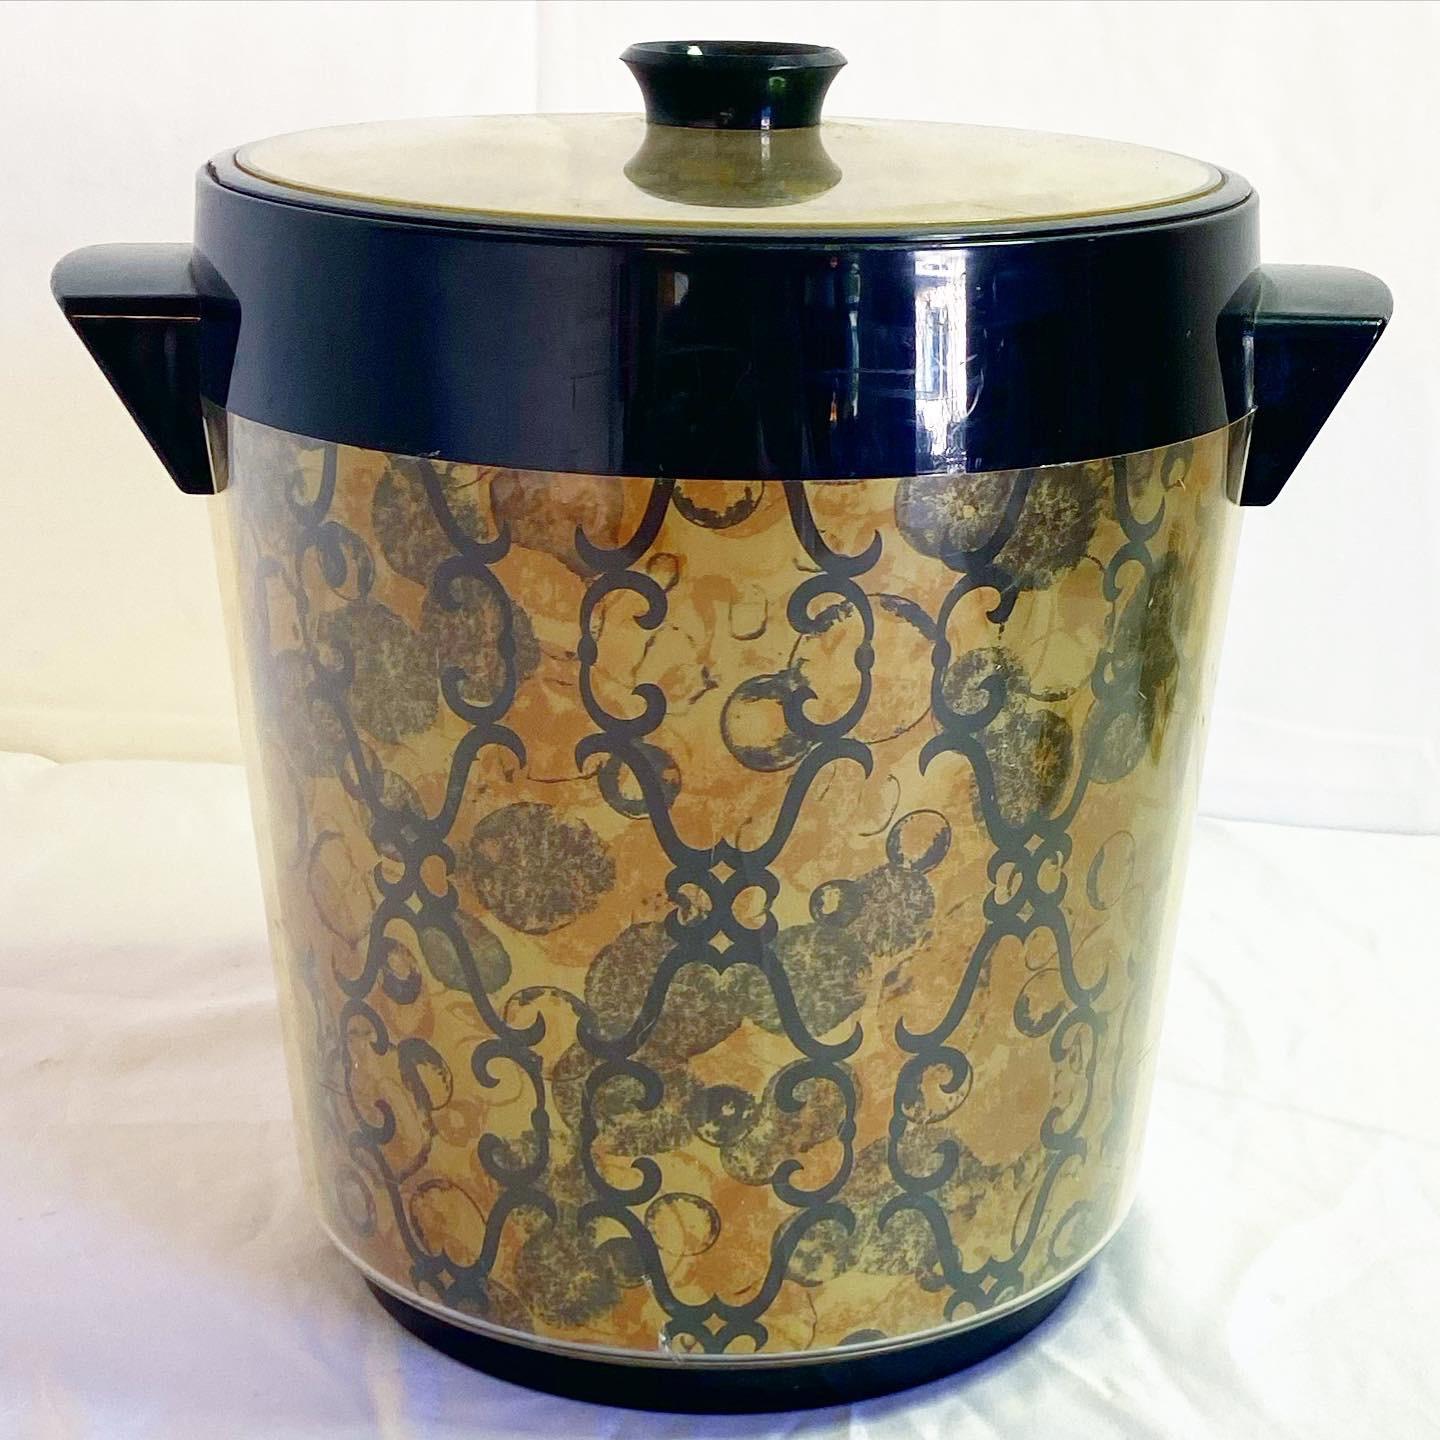 Retro 70s Gold & Black Ice Bucket By West Bend
